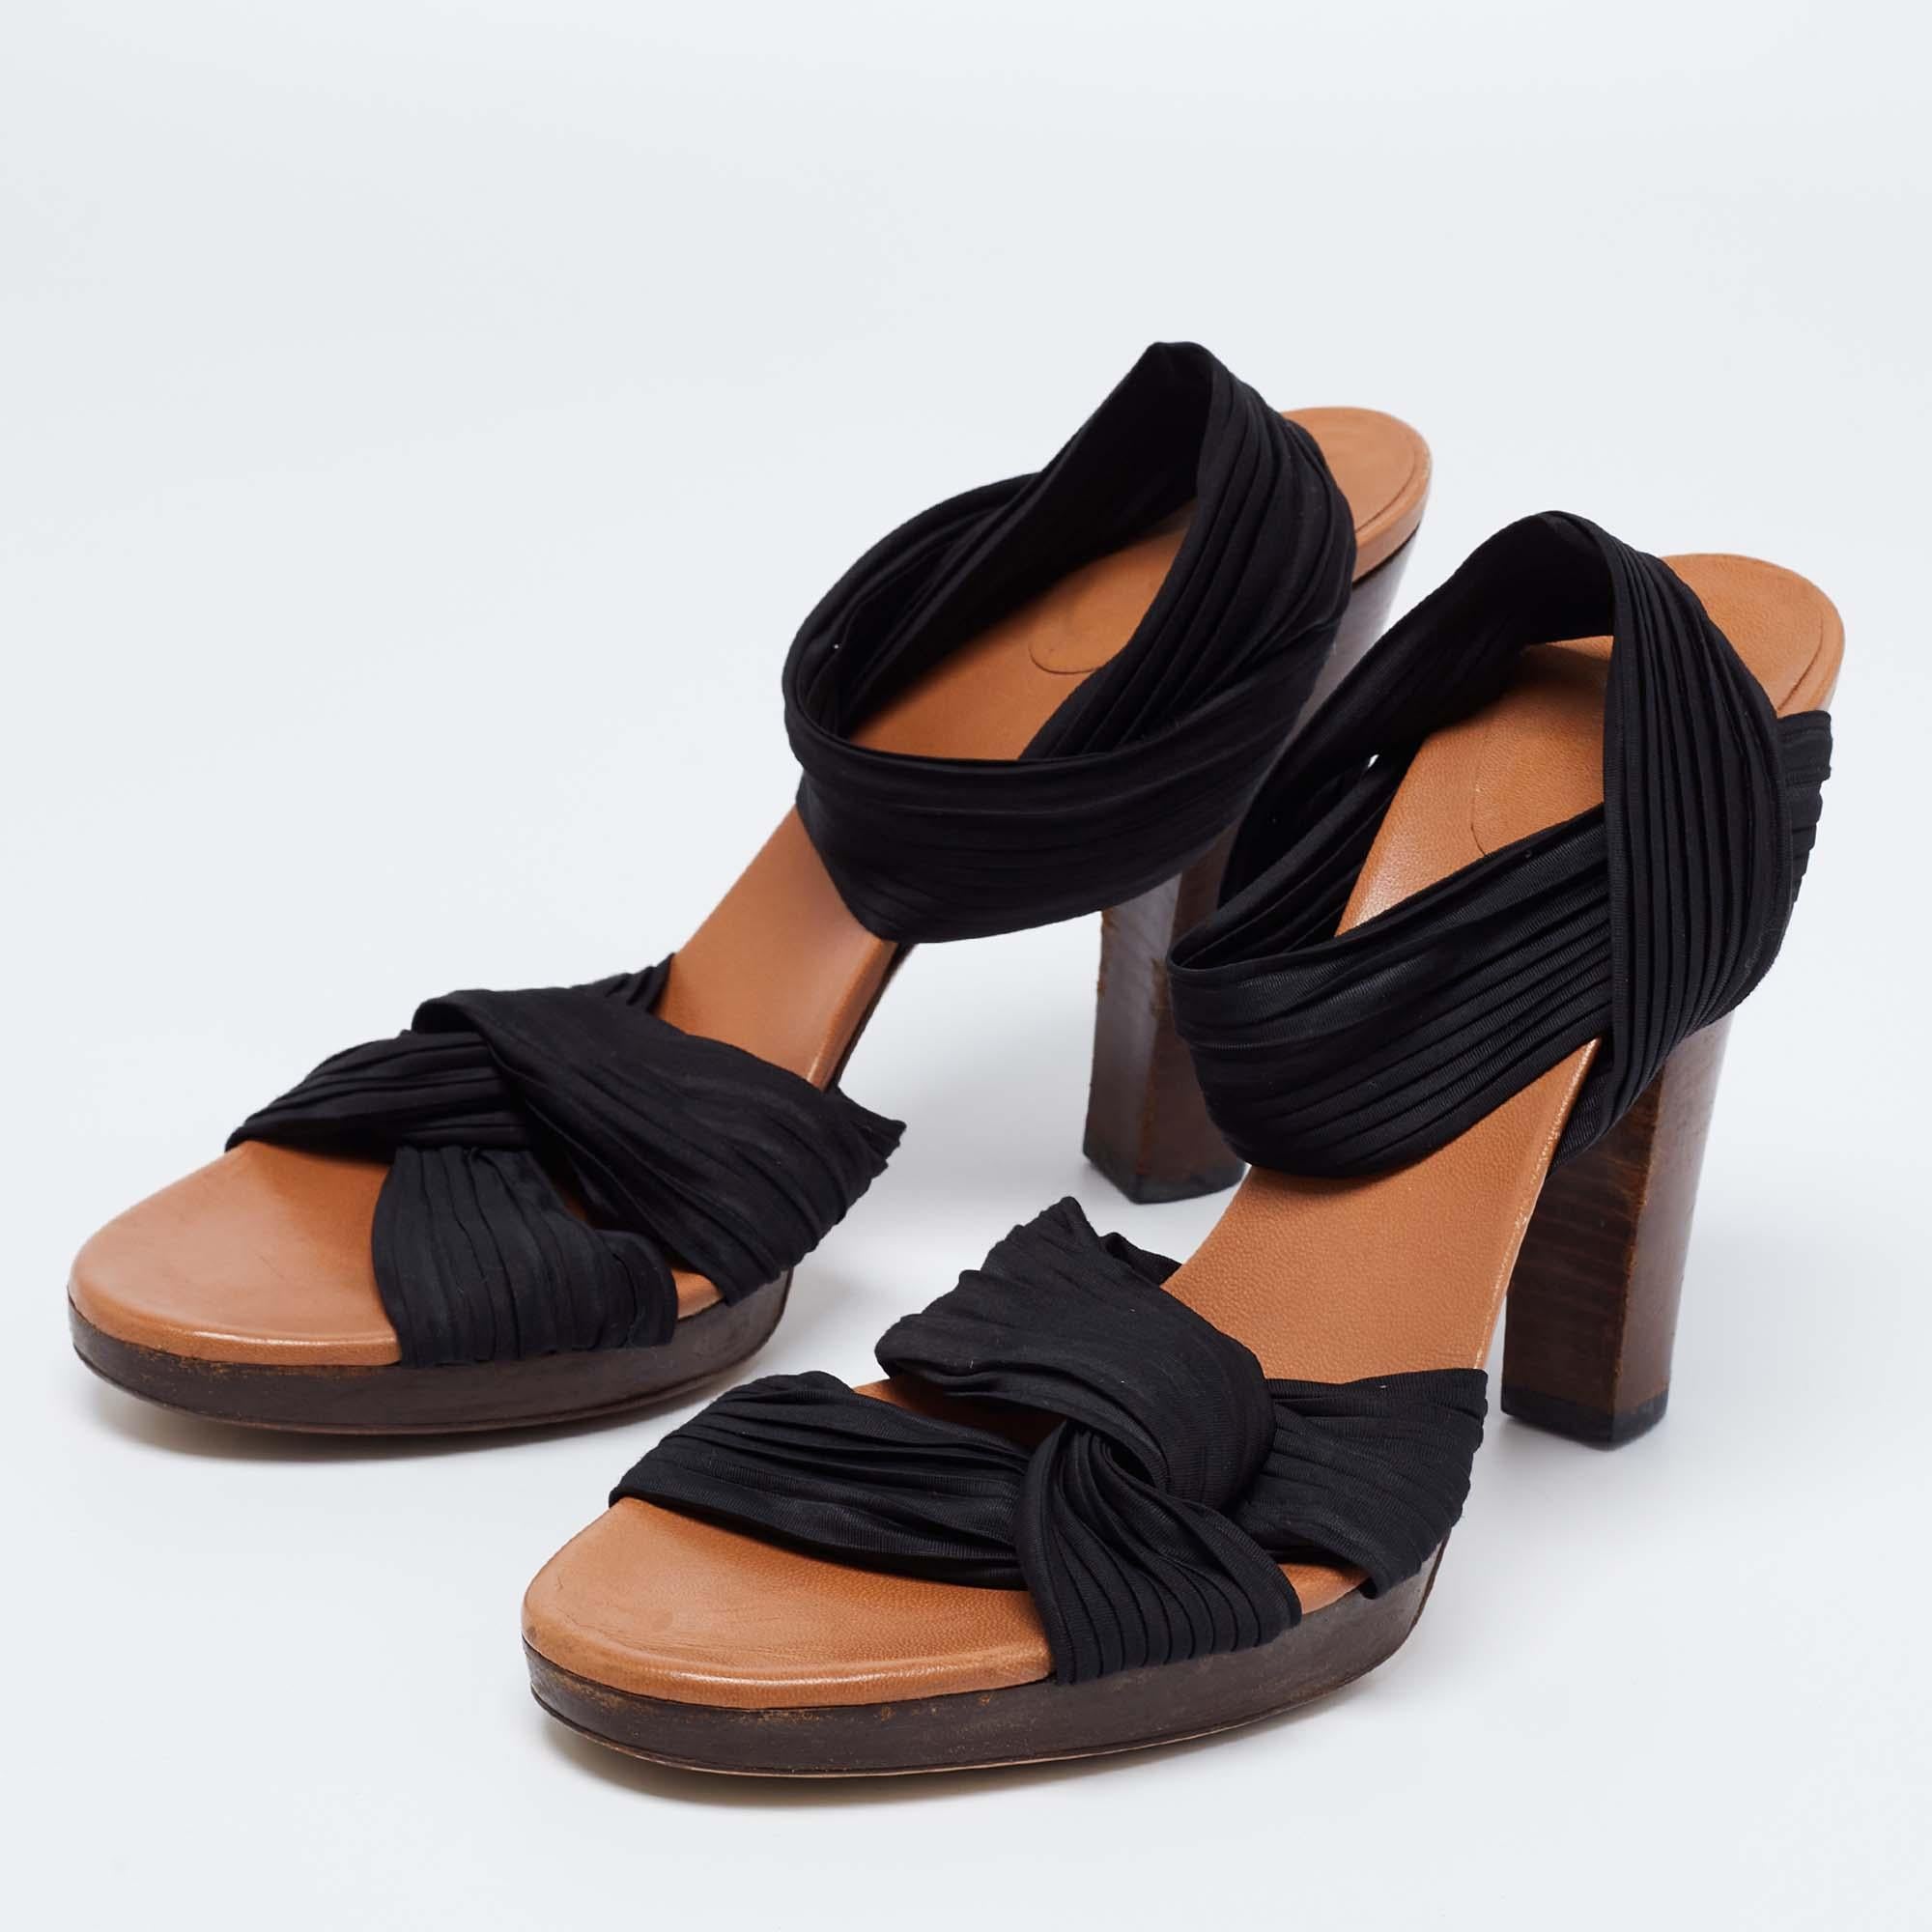 Frame your feet with these Gucci women's sandals. Created using pleated fabric and leather, the open-toe high heel sandals are perfect with short, midi, and maxi hemlines.

